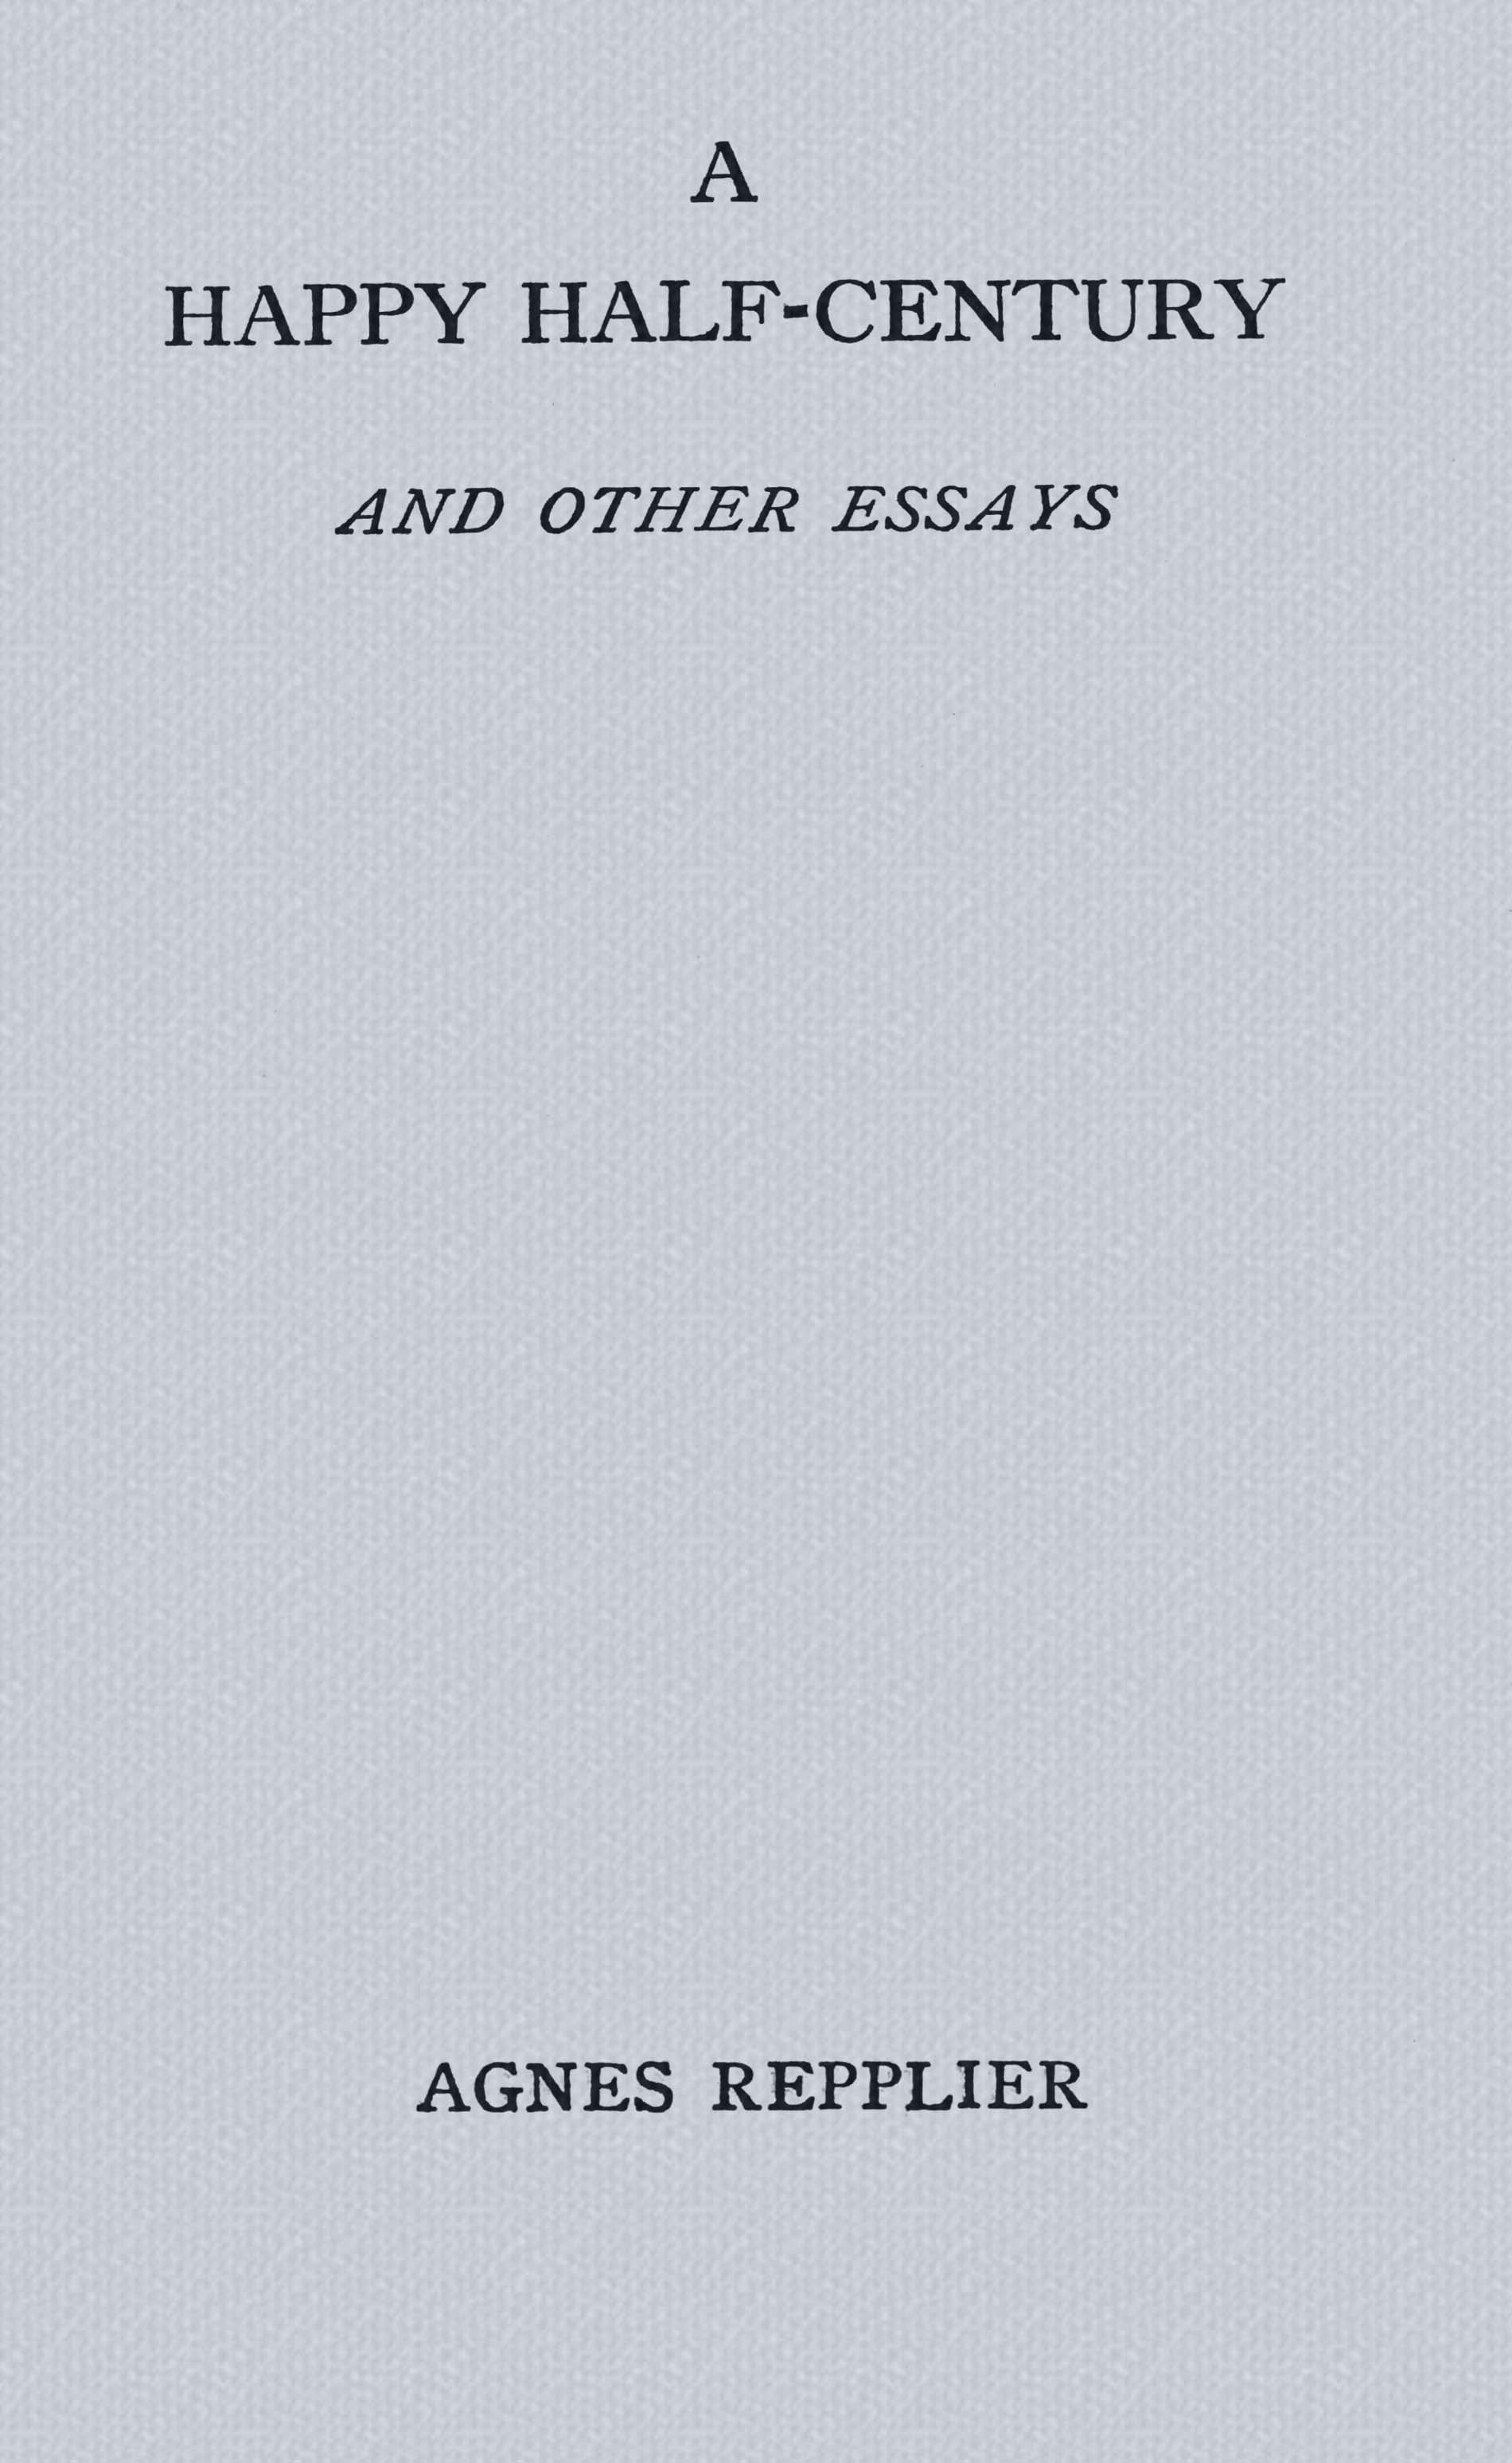 A happy half-century and other essays, by Agnes Repplier—A Project Gutenberg eBook pic